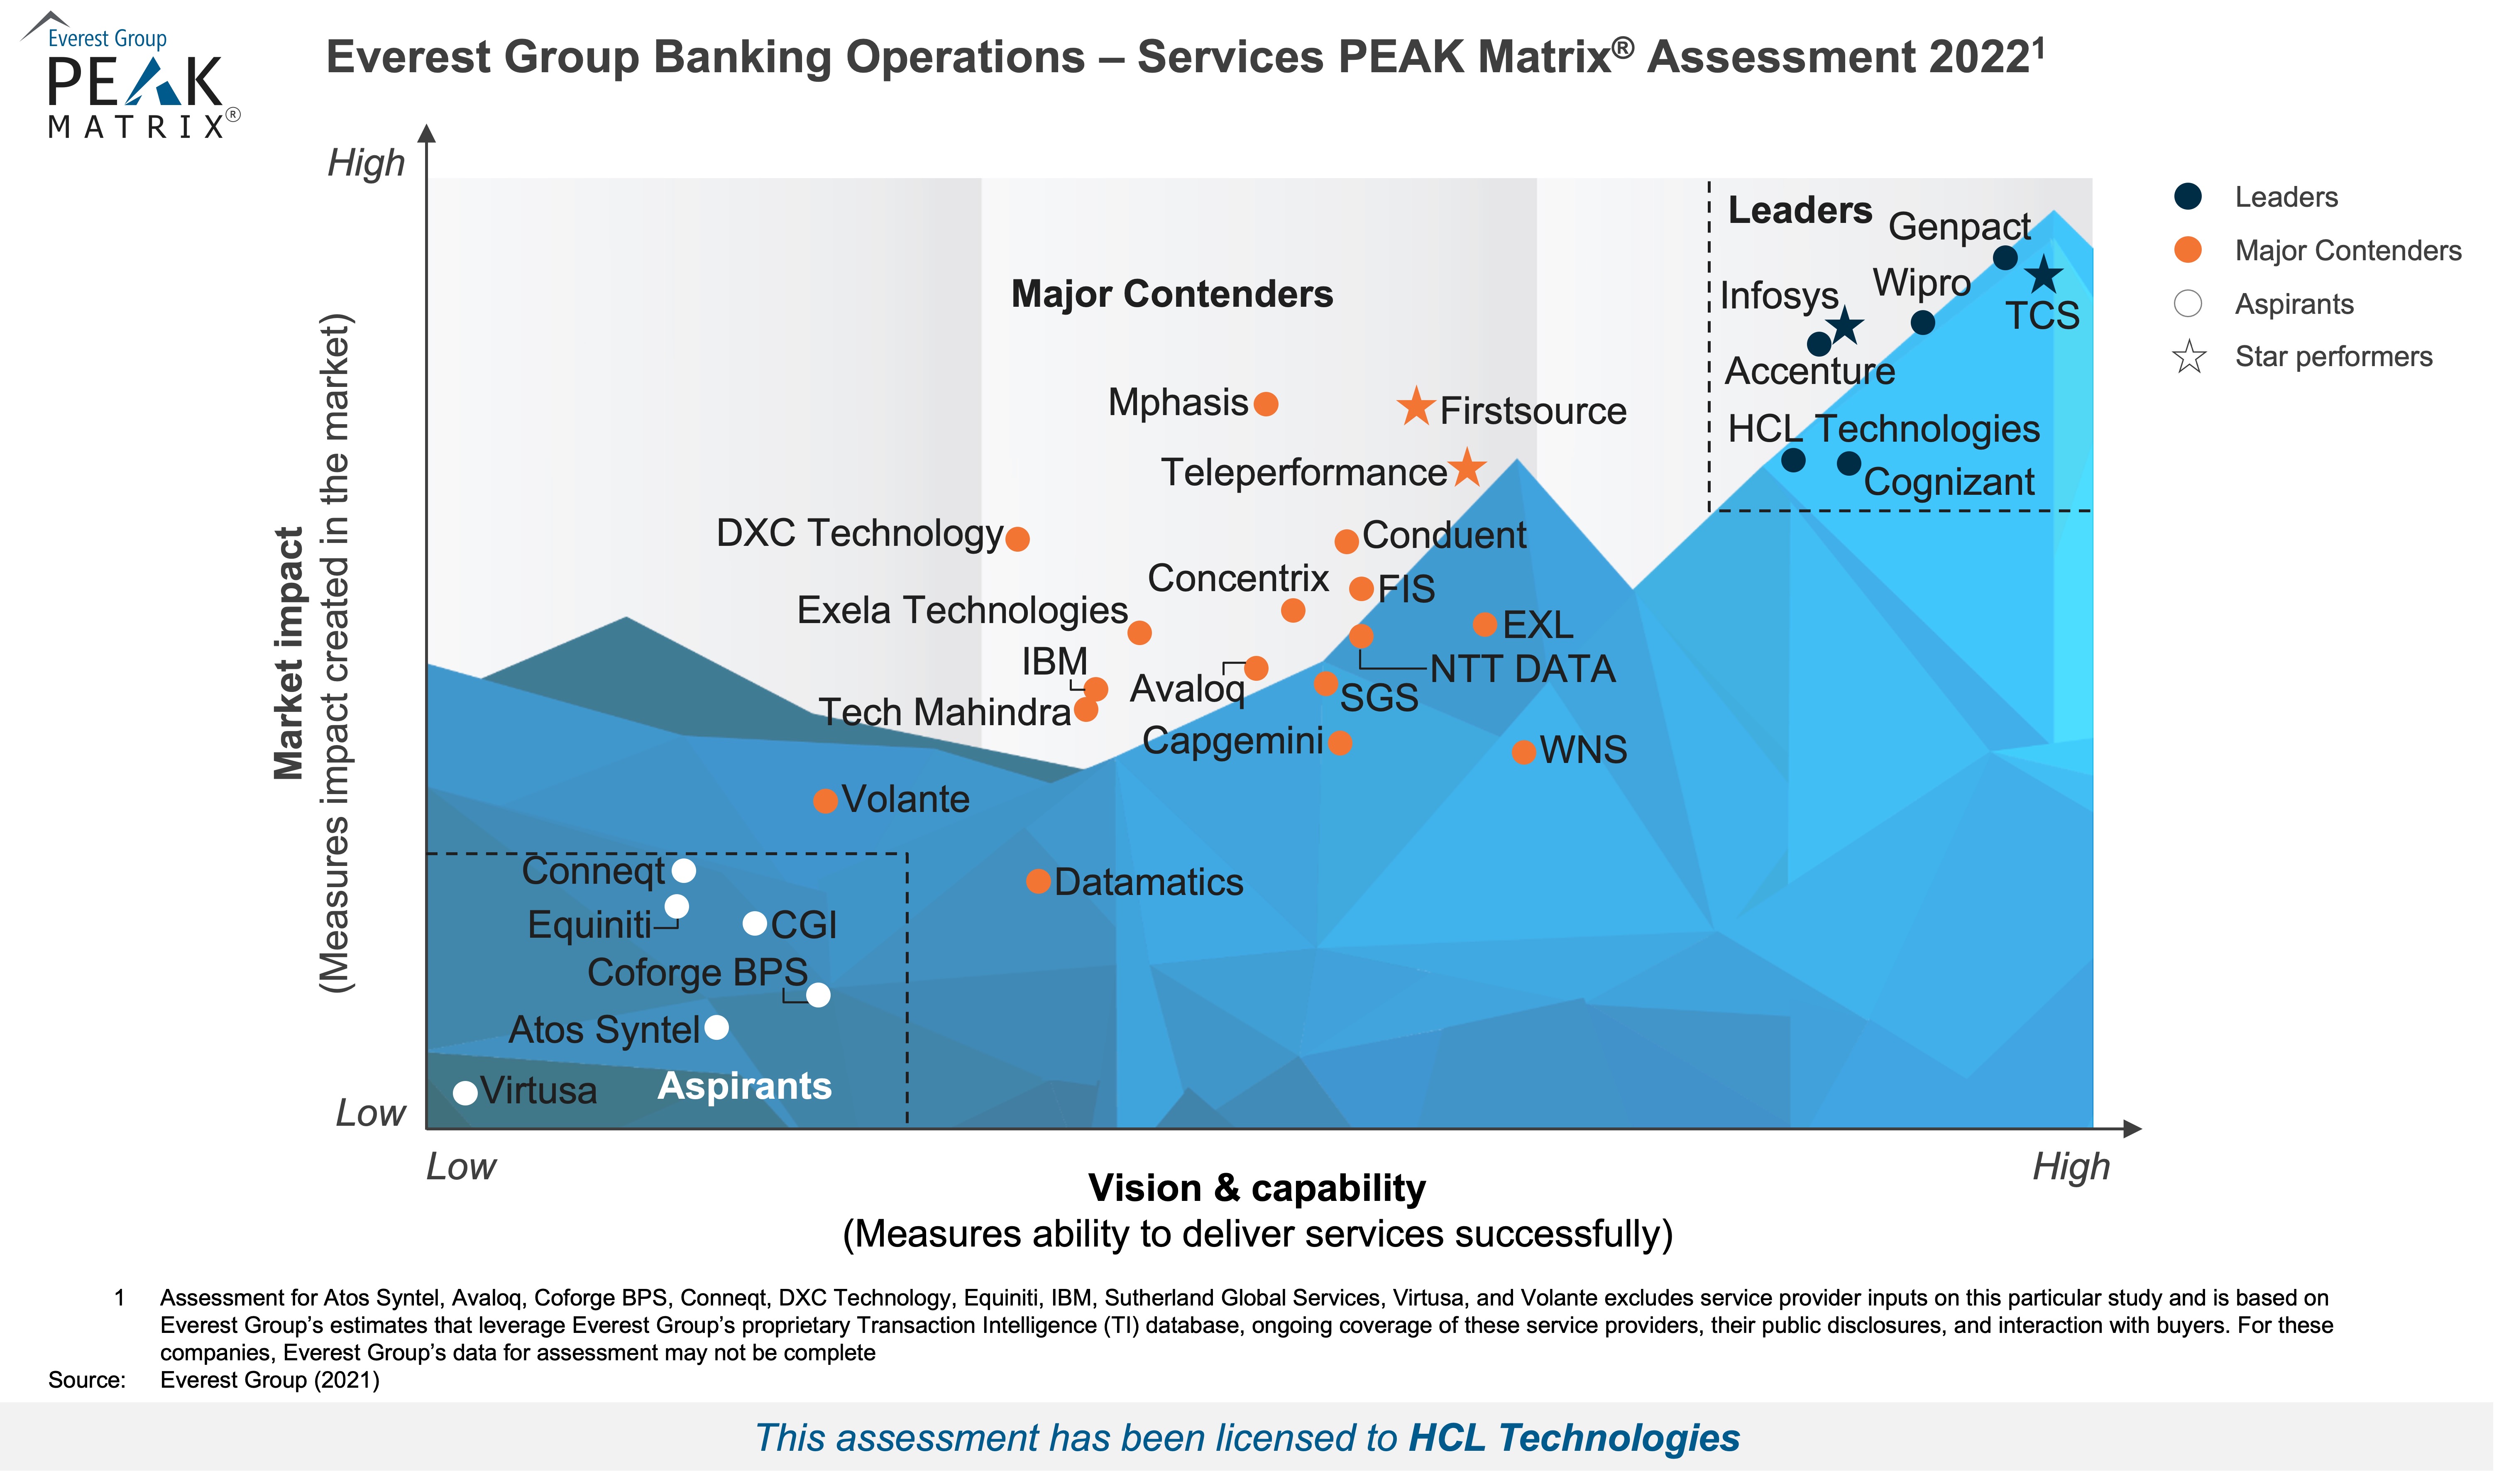 Everest Group’s Banking Operations 